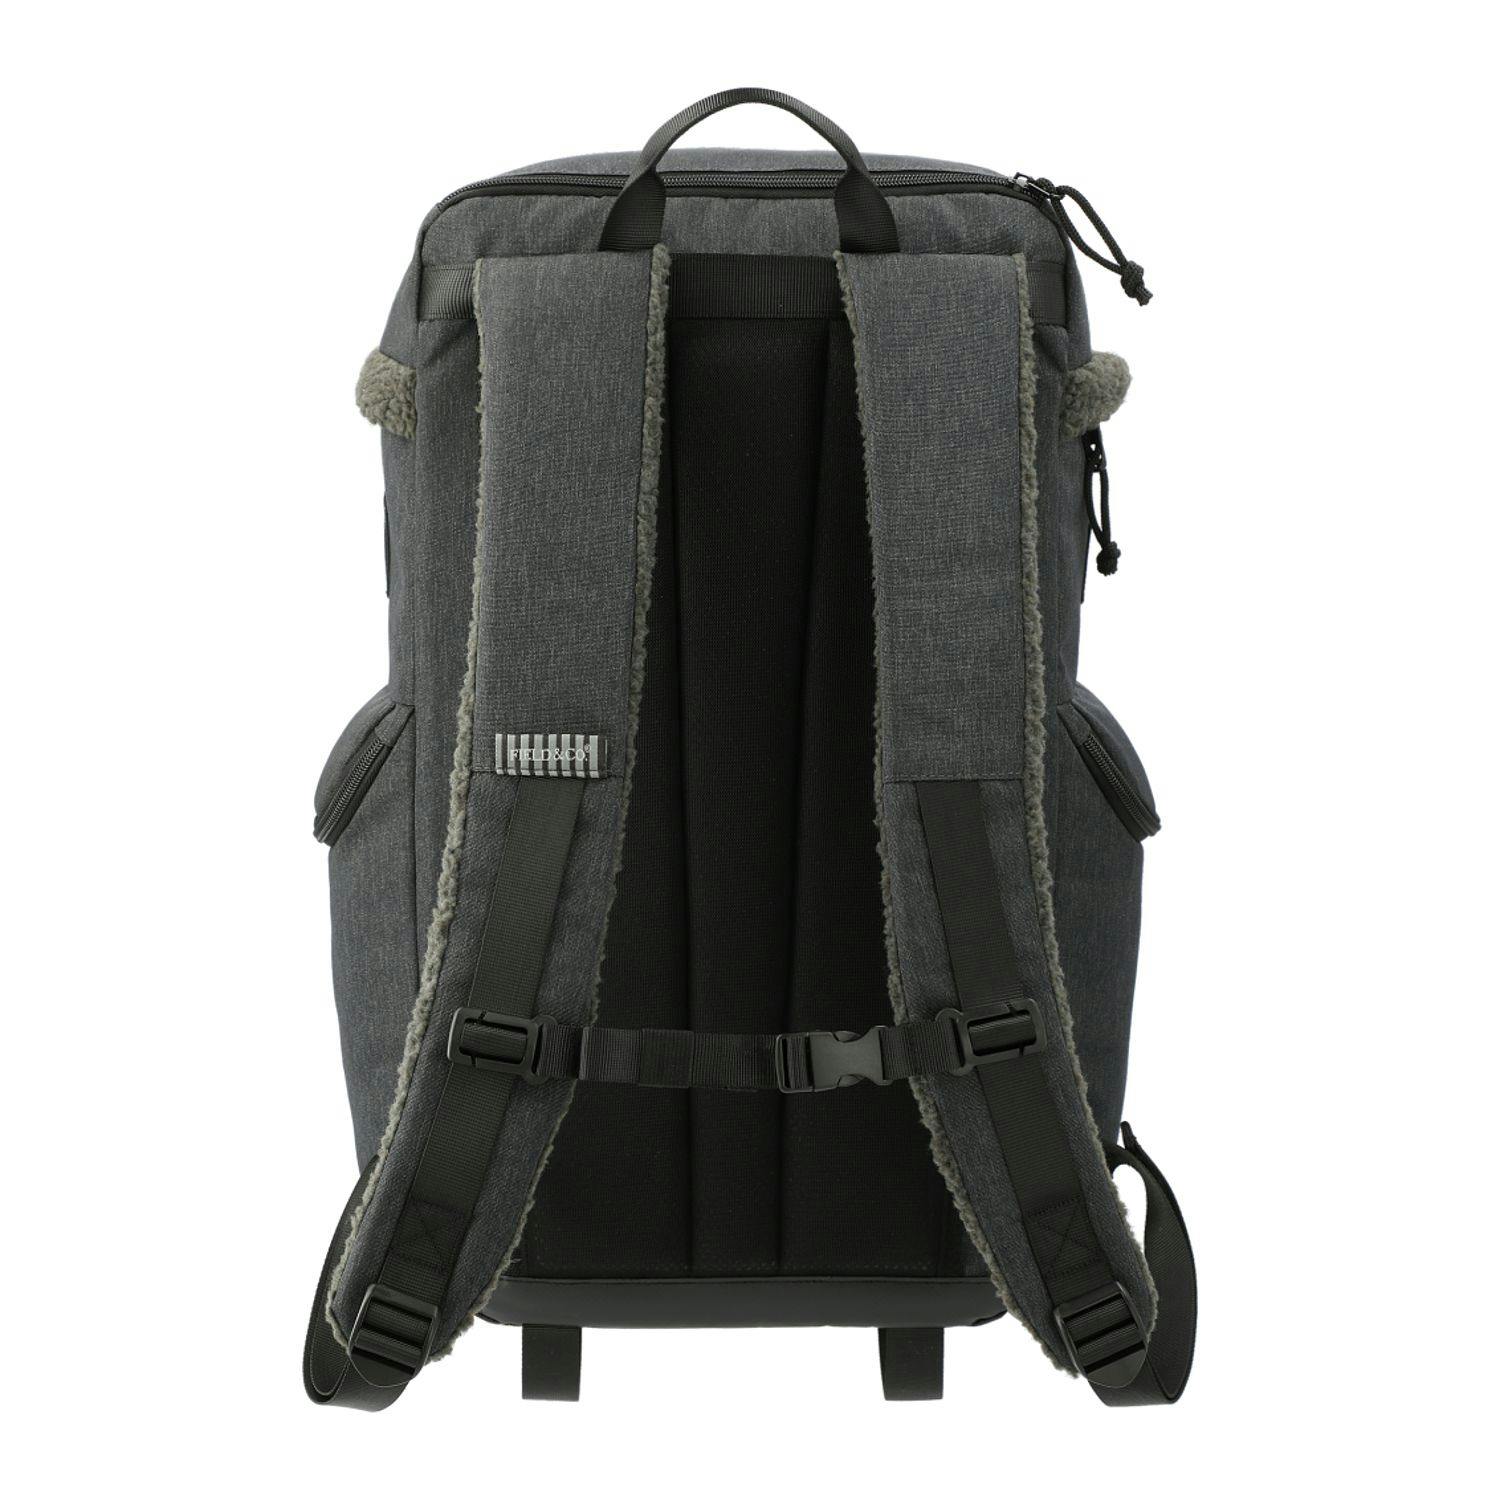 Field & Co. Fireside Eco 15" Computer Rucksack - additional Image 1